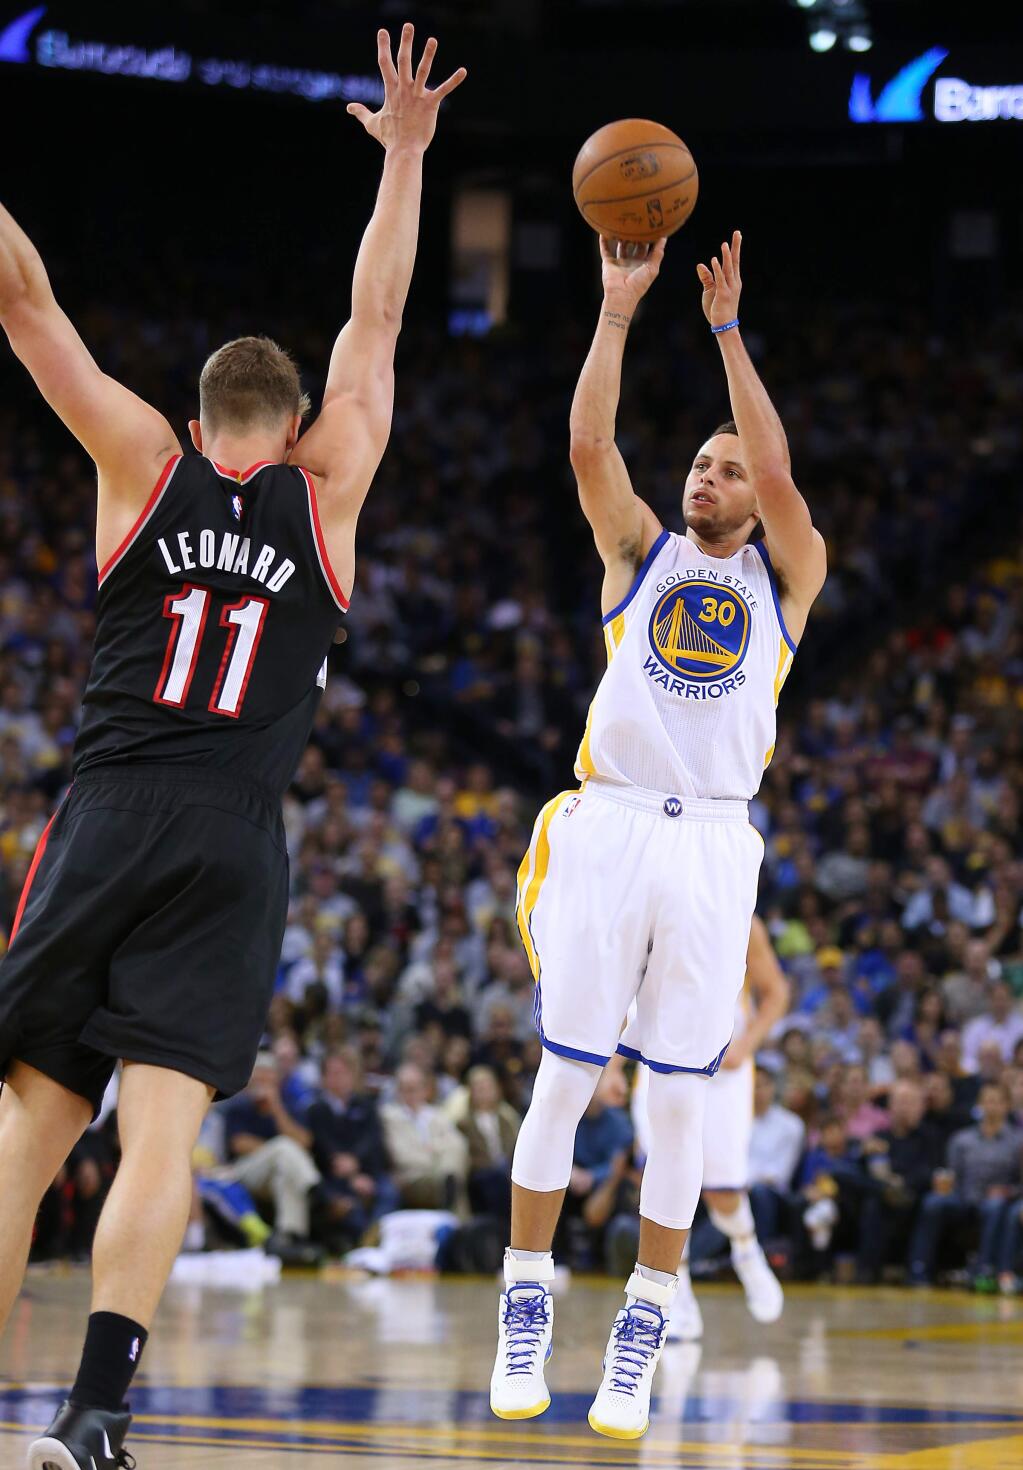 Golden State Warriors guard Stephen Curry hits a three-point shot over Portland Trailblazers center Meyers Leonard to break the single-season record for three-pointers, during their game in Oakland on Thursday, April 9, 2015. (Christopher Chung/ The Press Democrat)